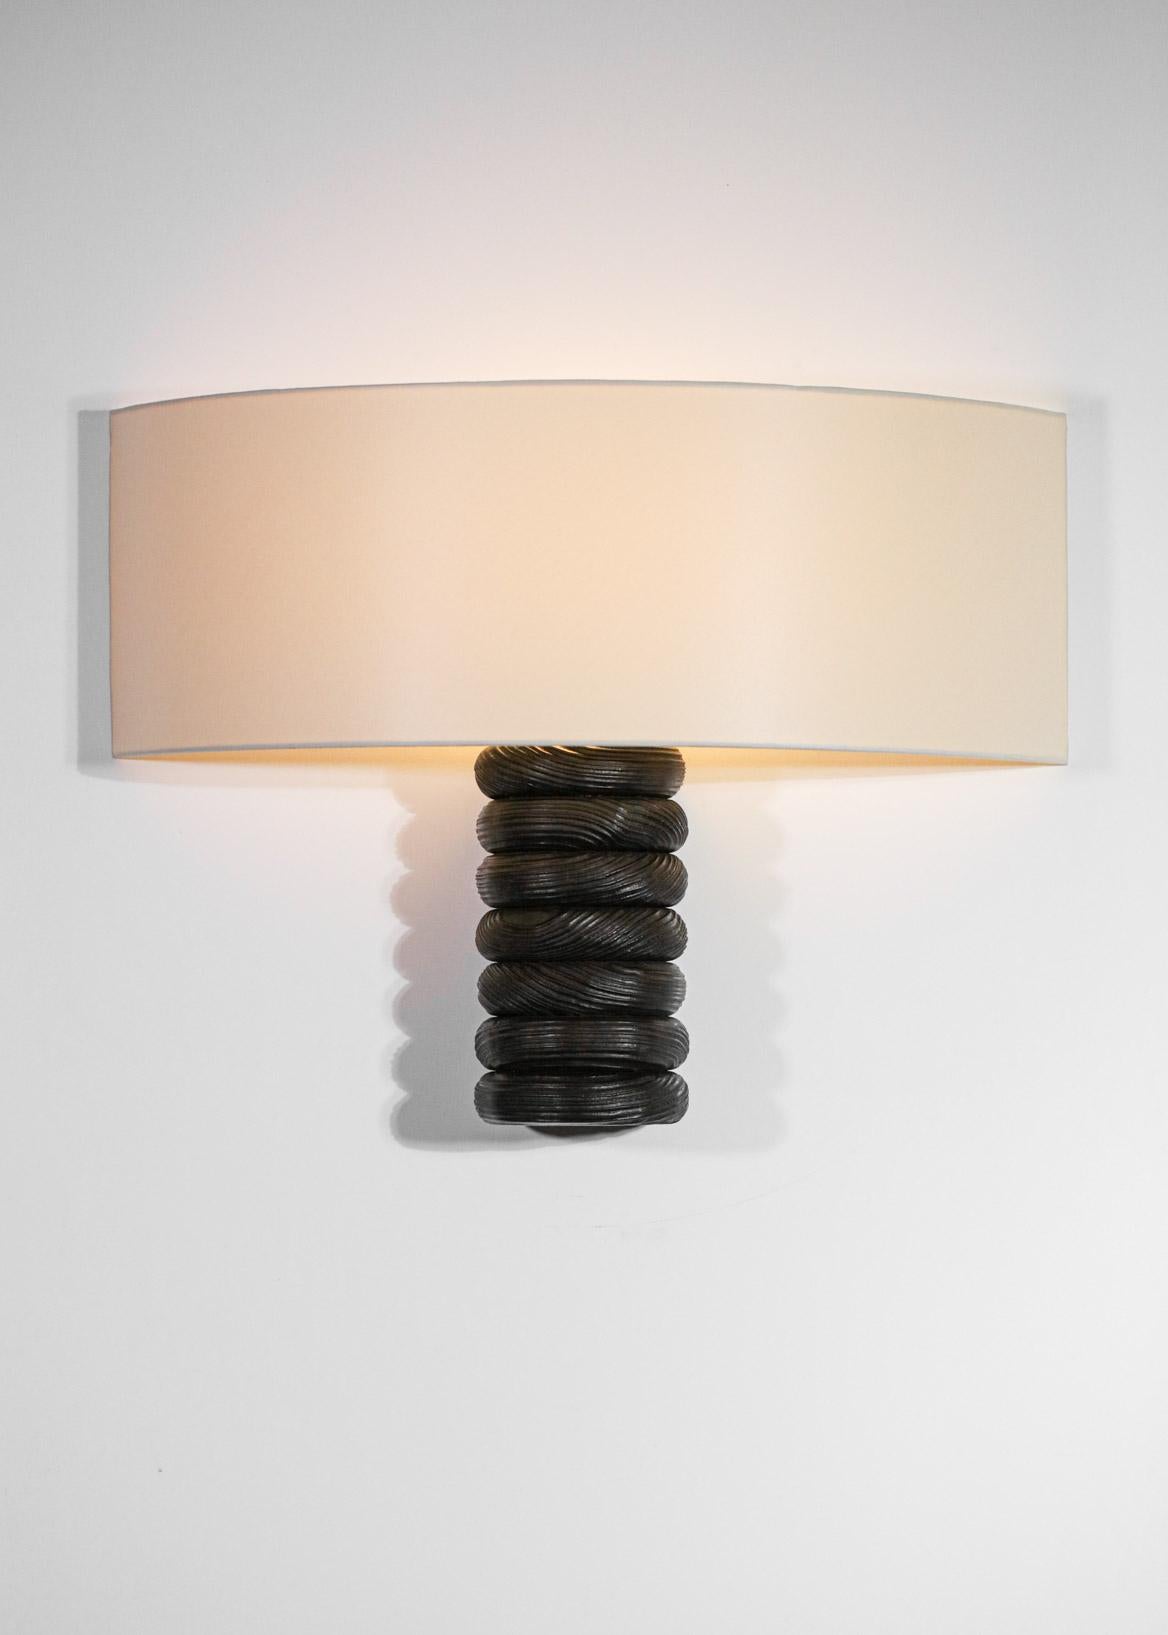 Organic Modern Contemporary Log Wall Lamp by Vincent Vincent Burnt Wood For Sale